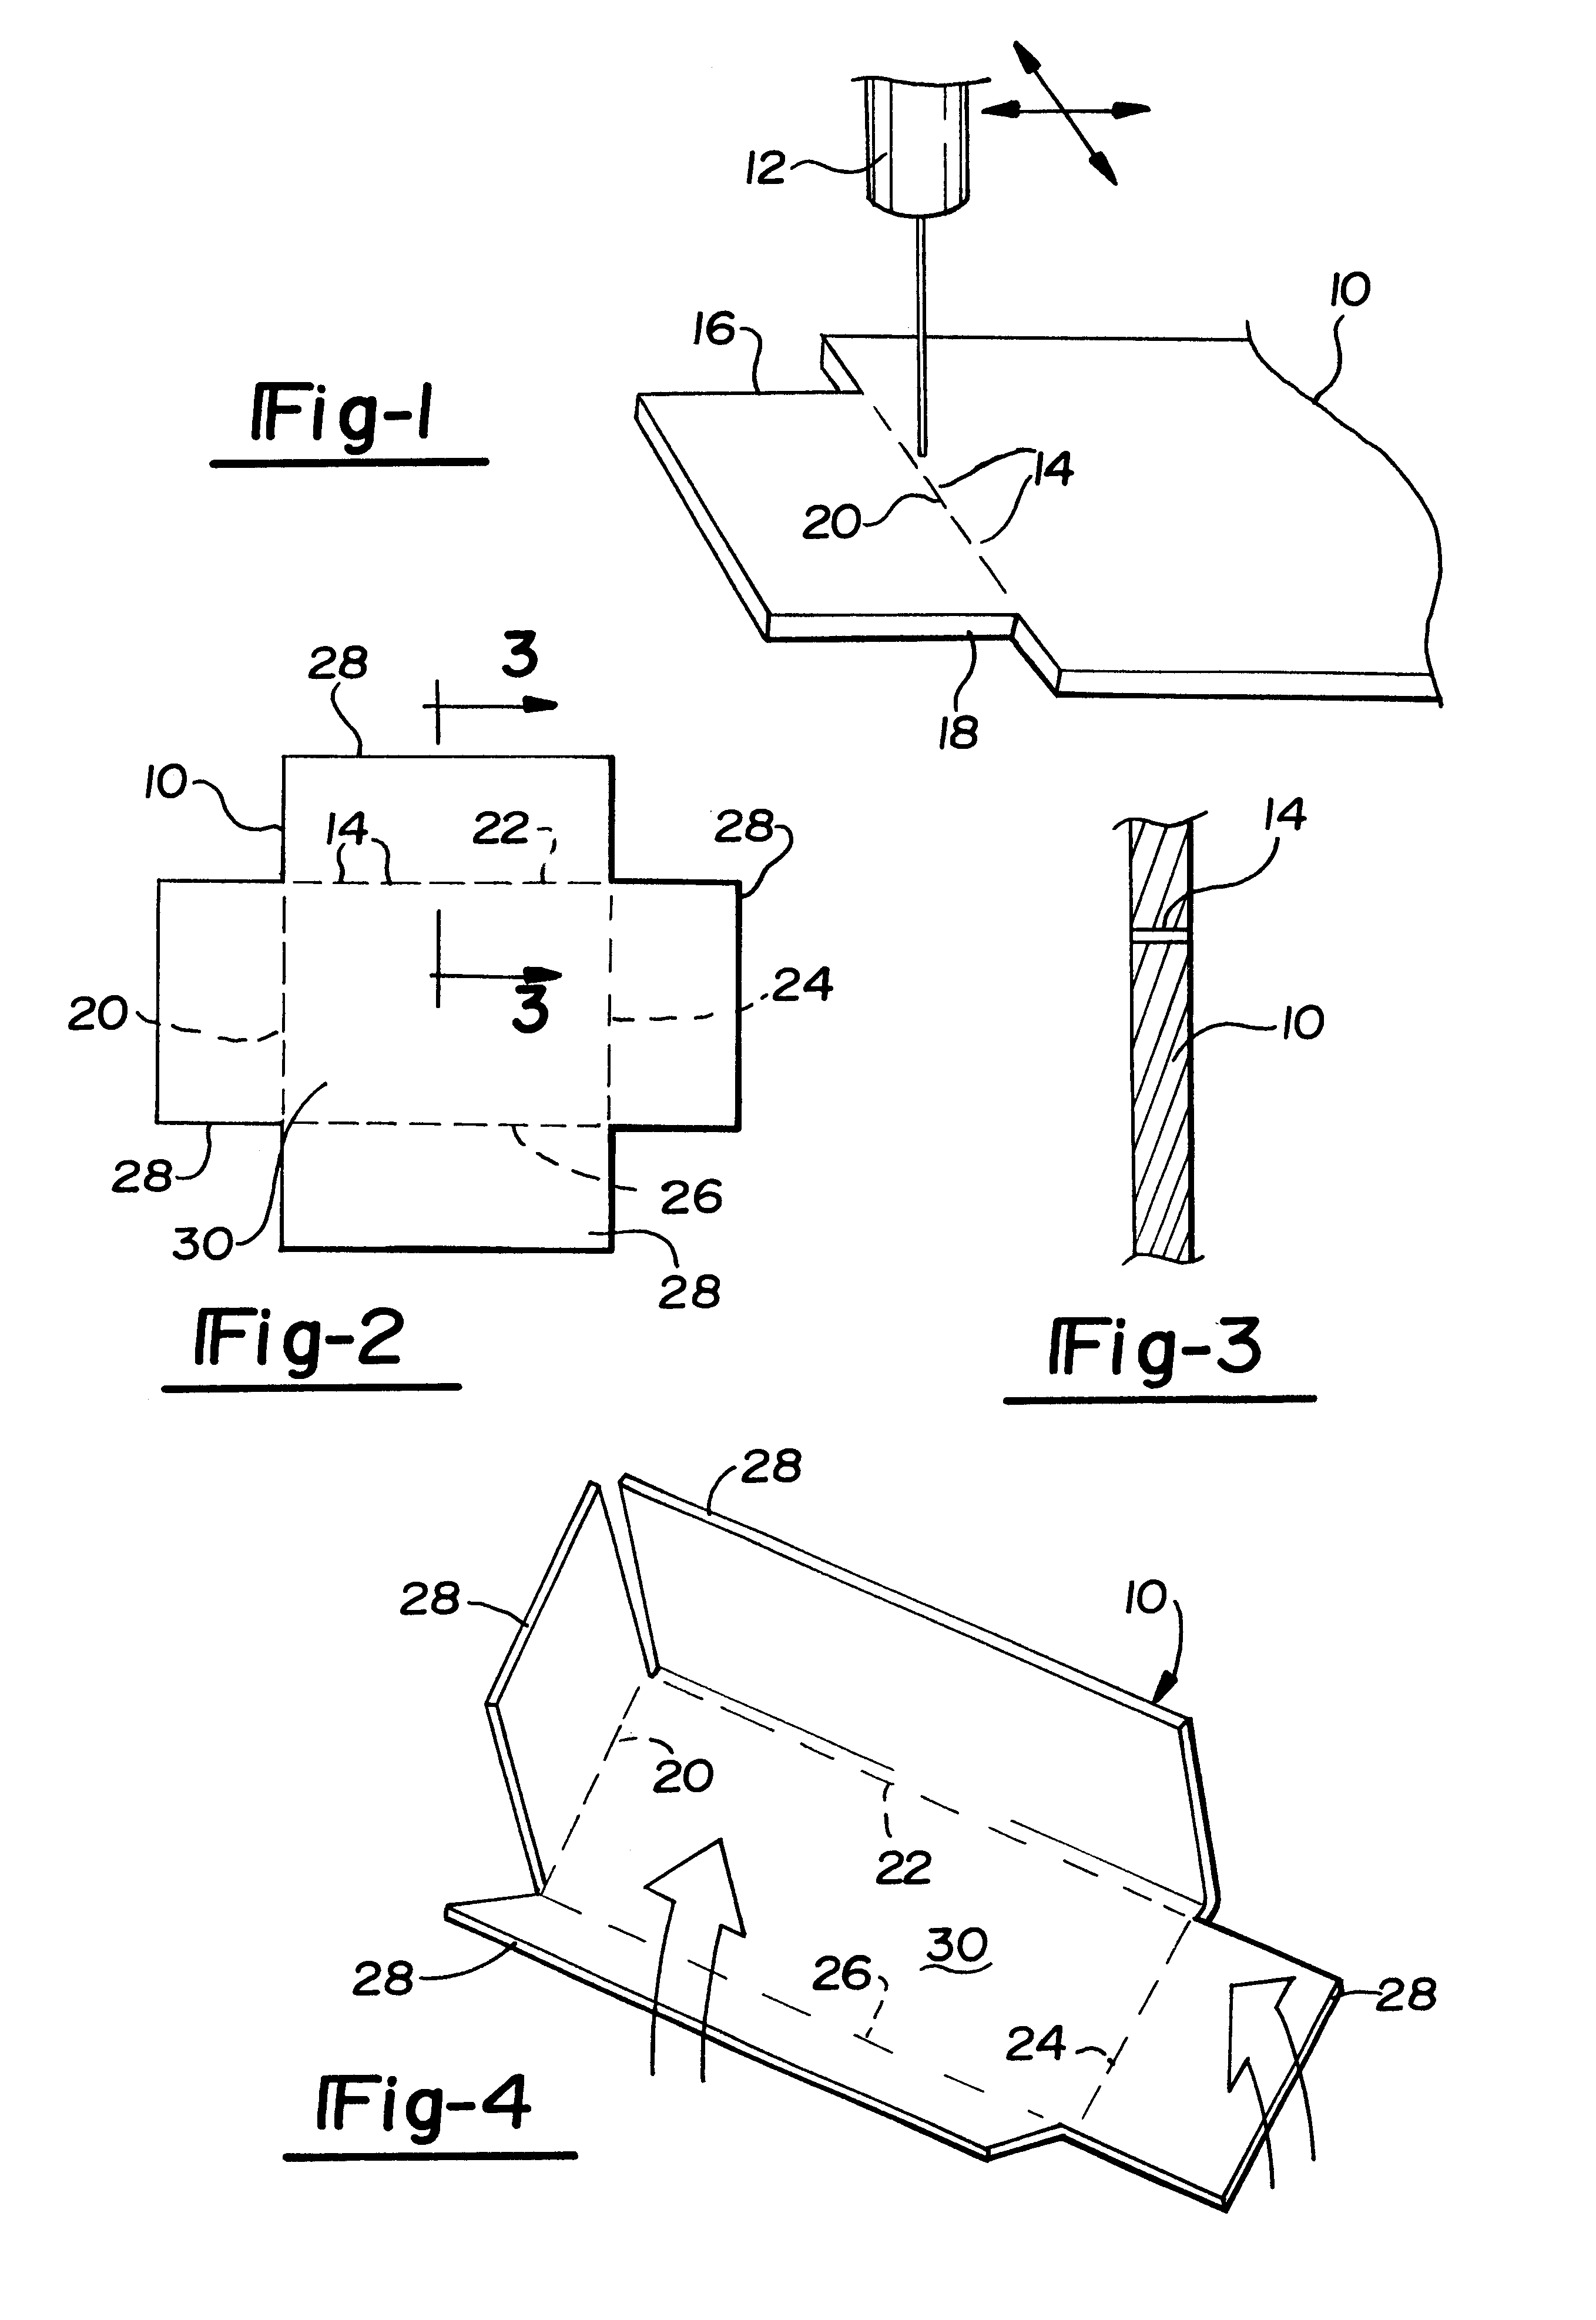 Method for phototyping parts from sheet metal